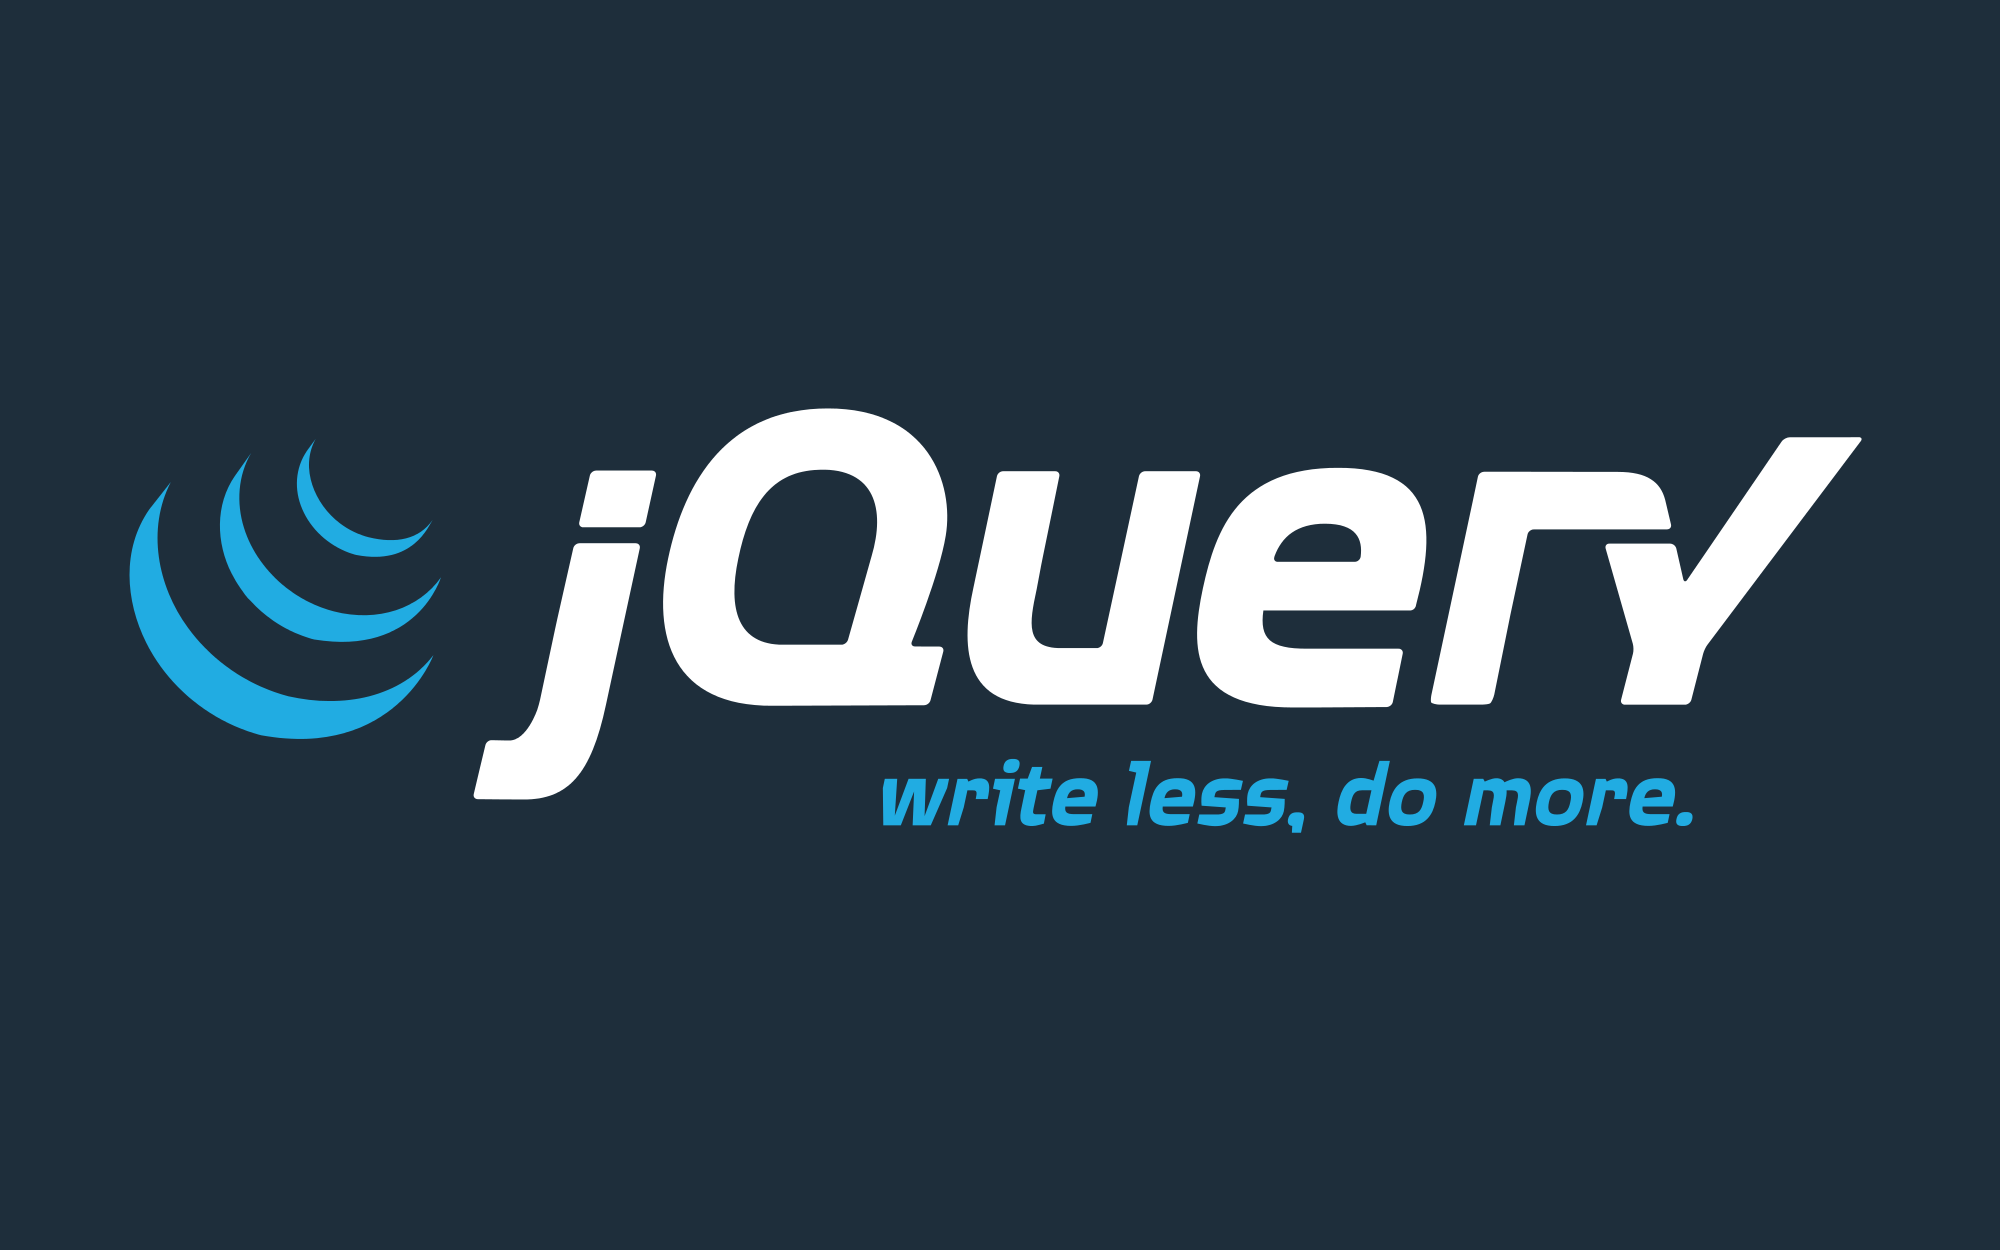 jQuery.png